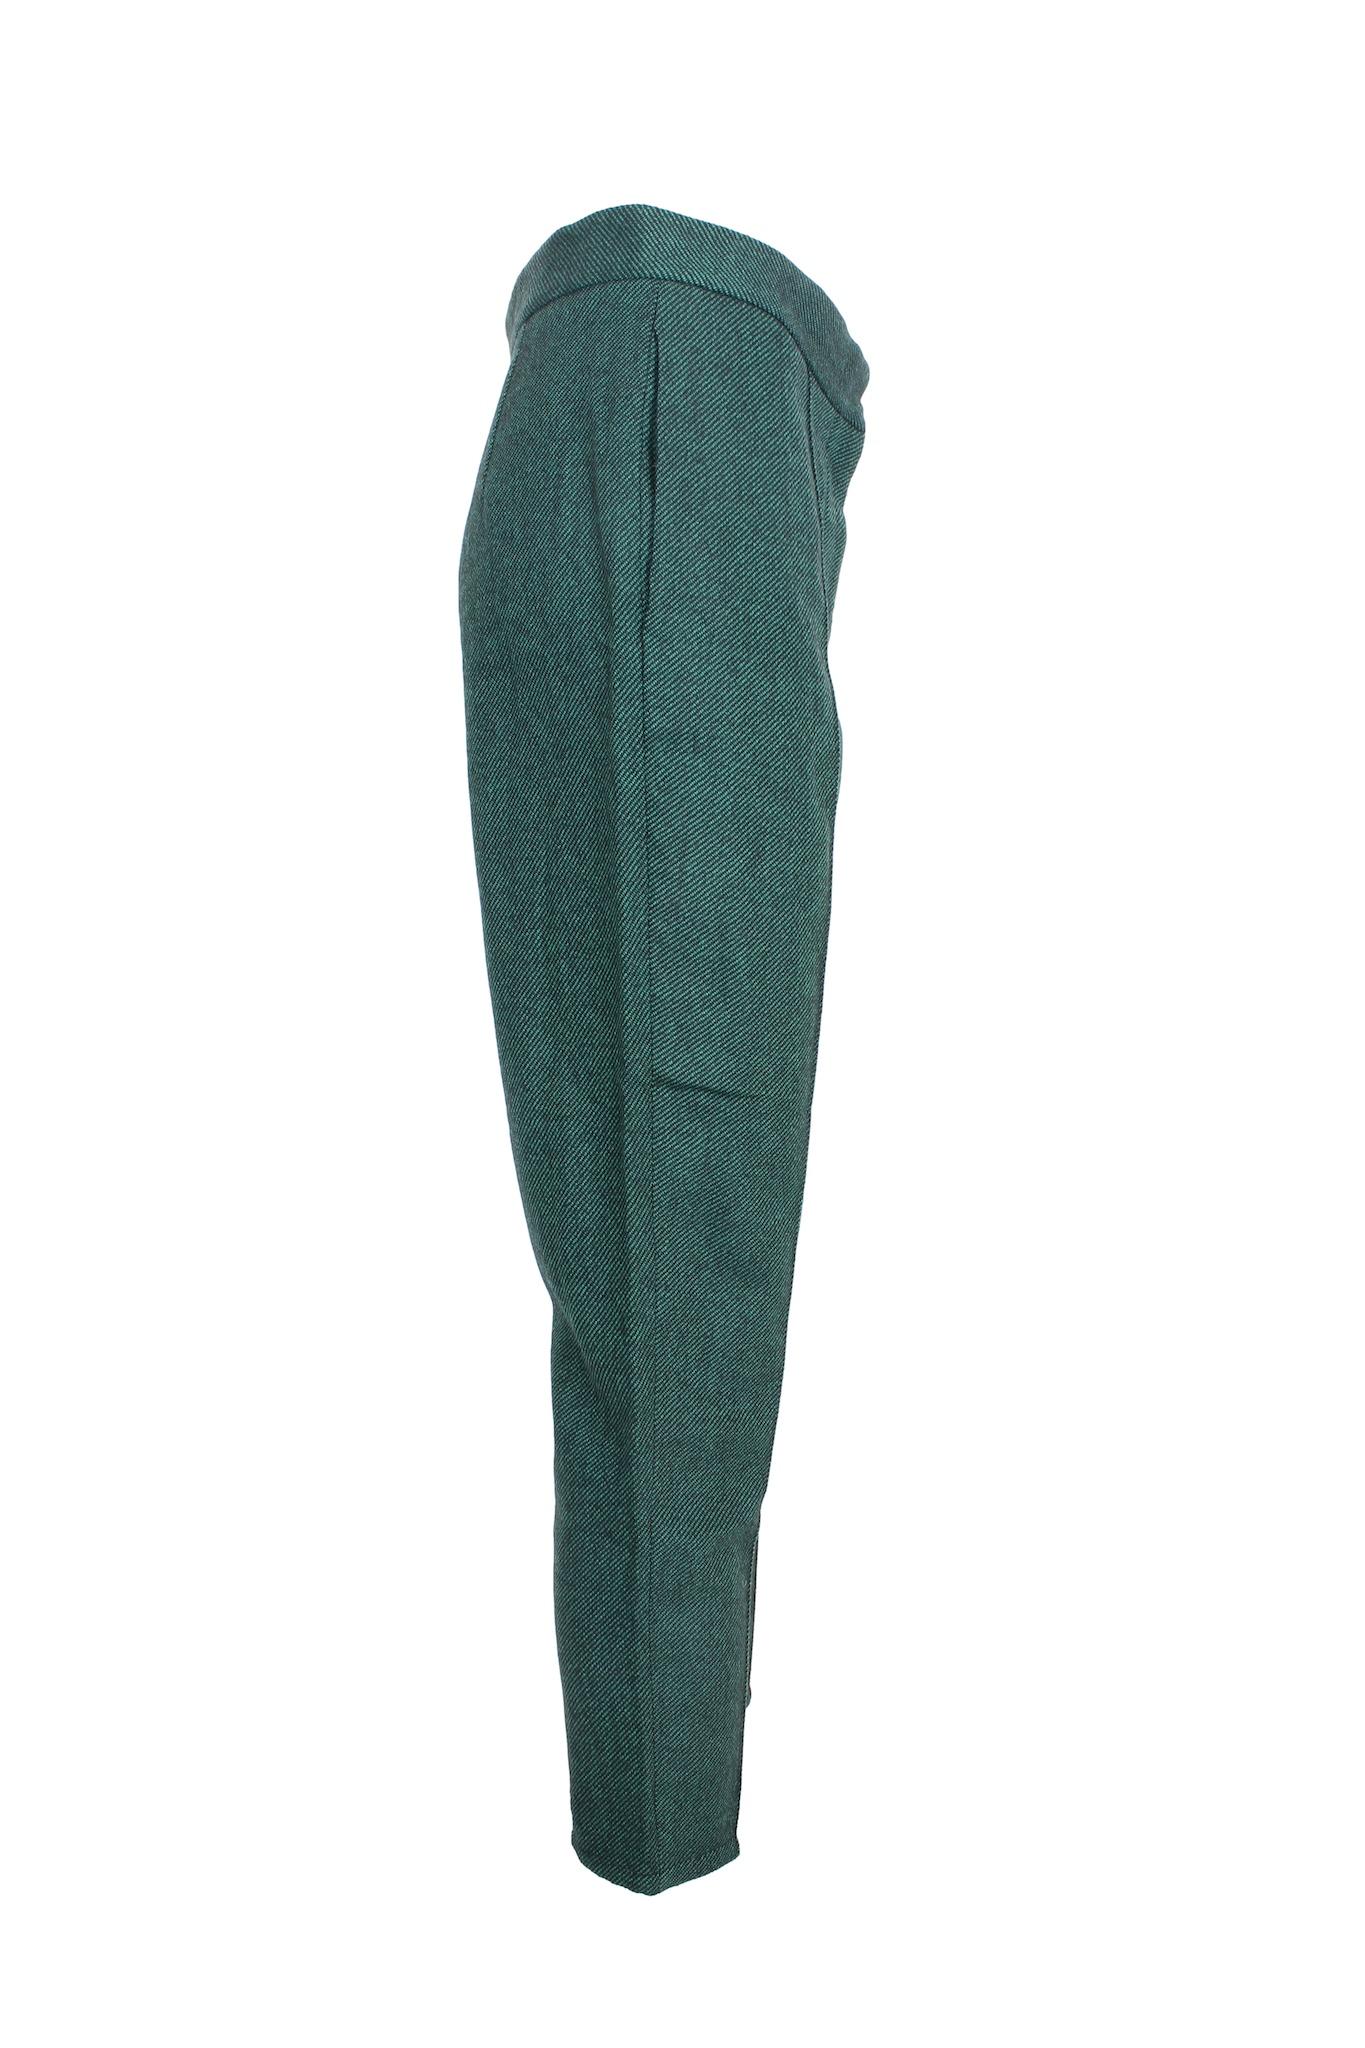 Stella McCartney Green Black Wool Capri Pants 2000s In Excellent Condition For Sale In Brindisi, Bt